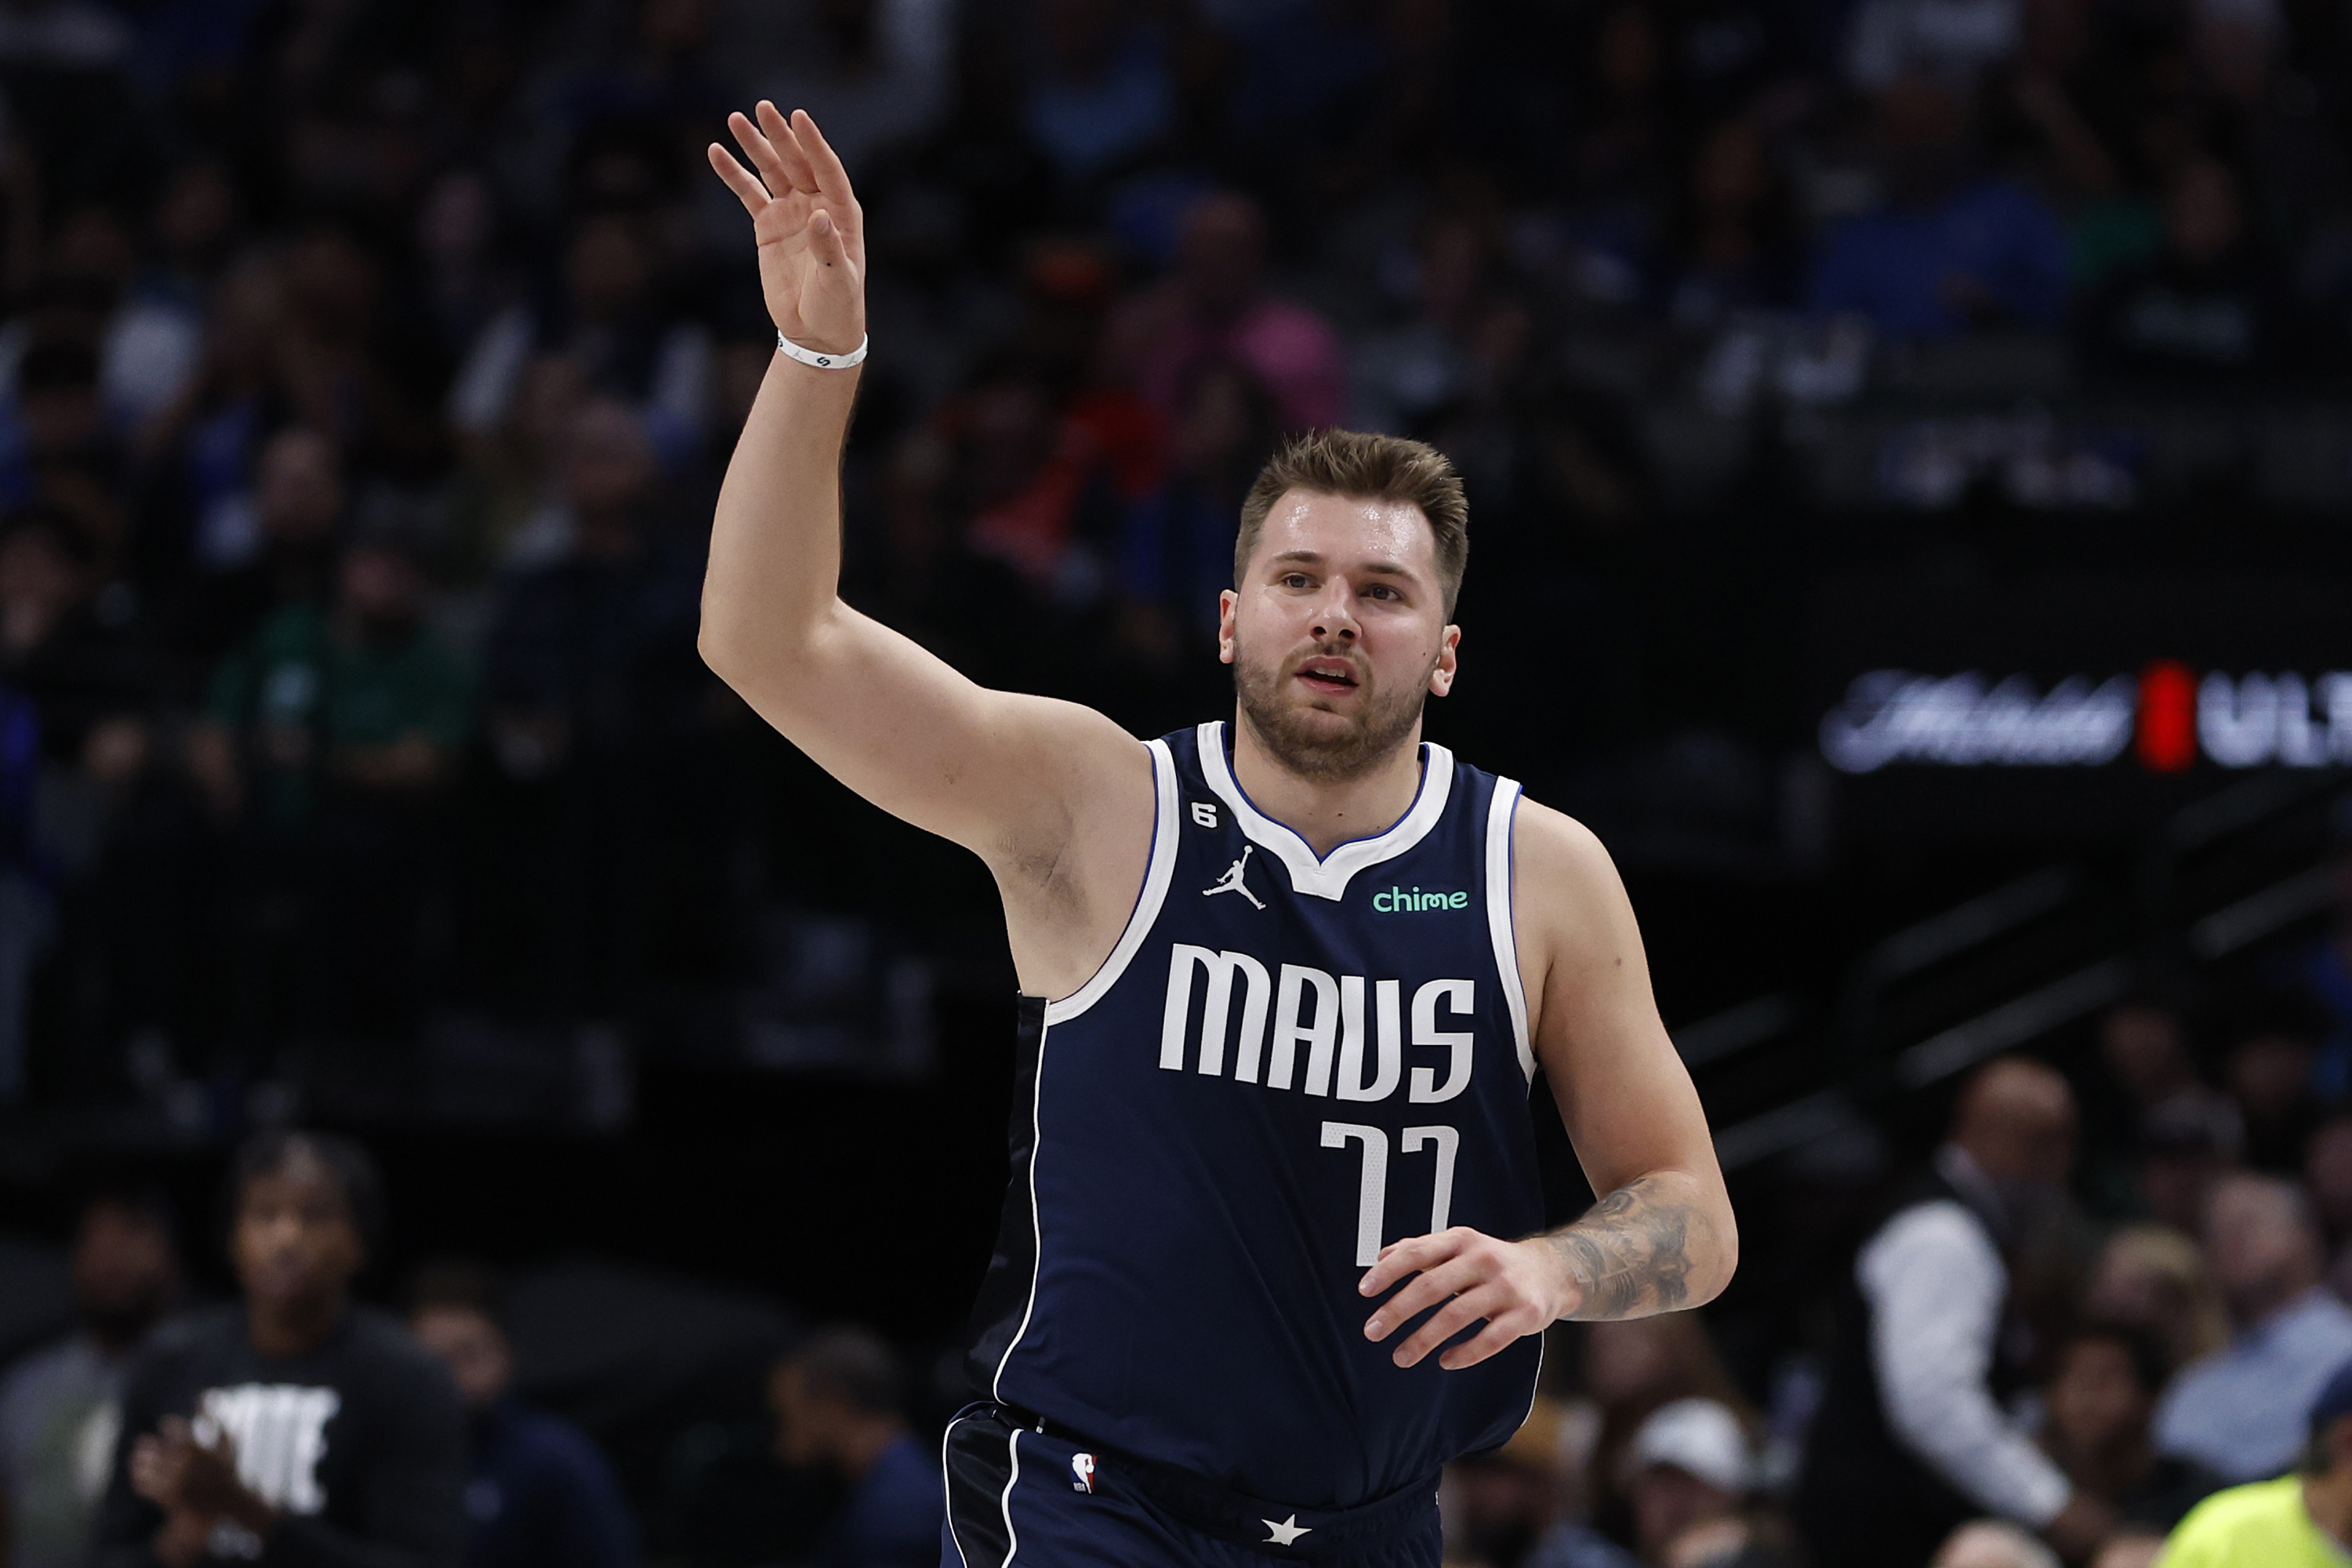 Get +450 Odds On This Luka Doncic Boost!